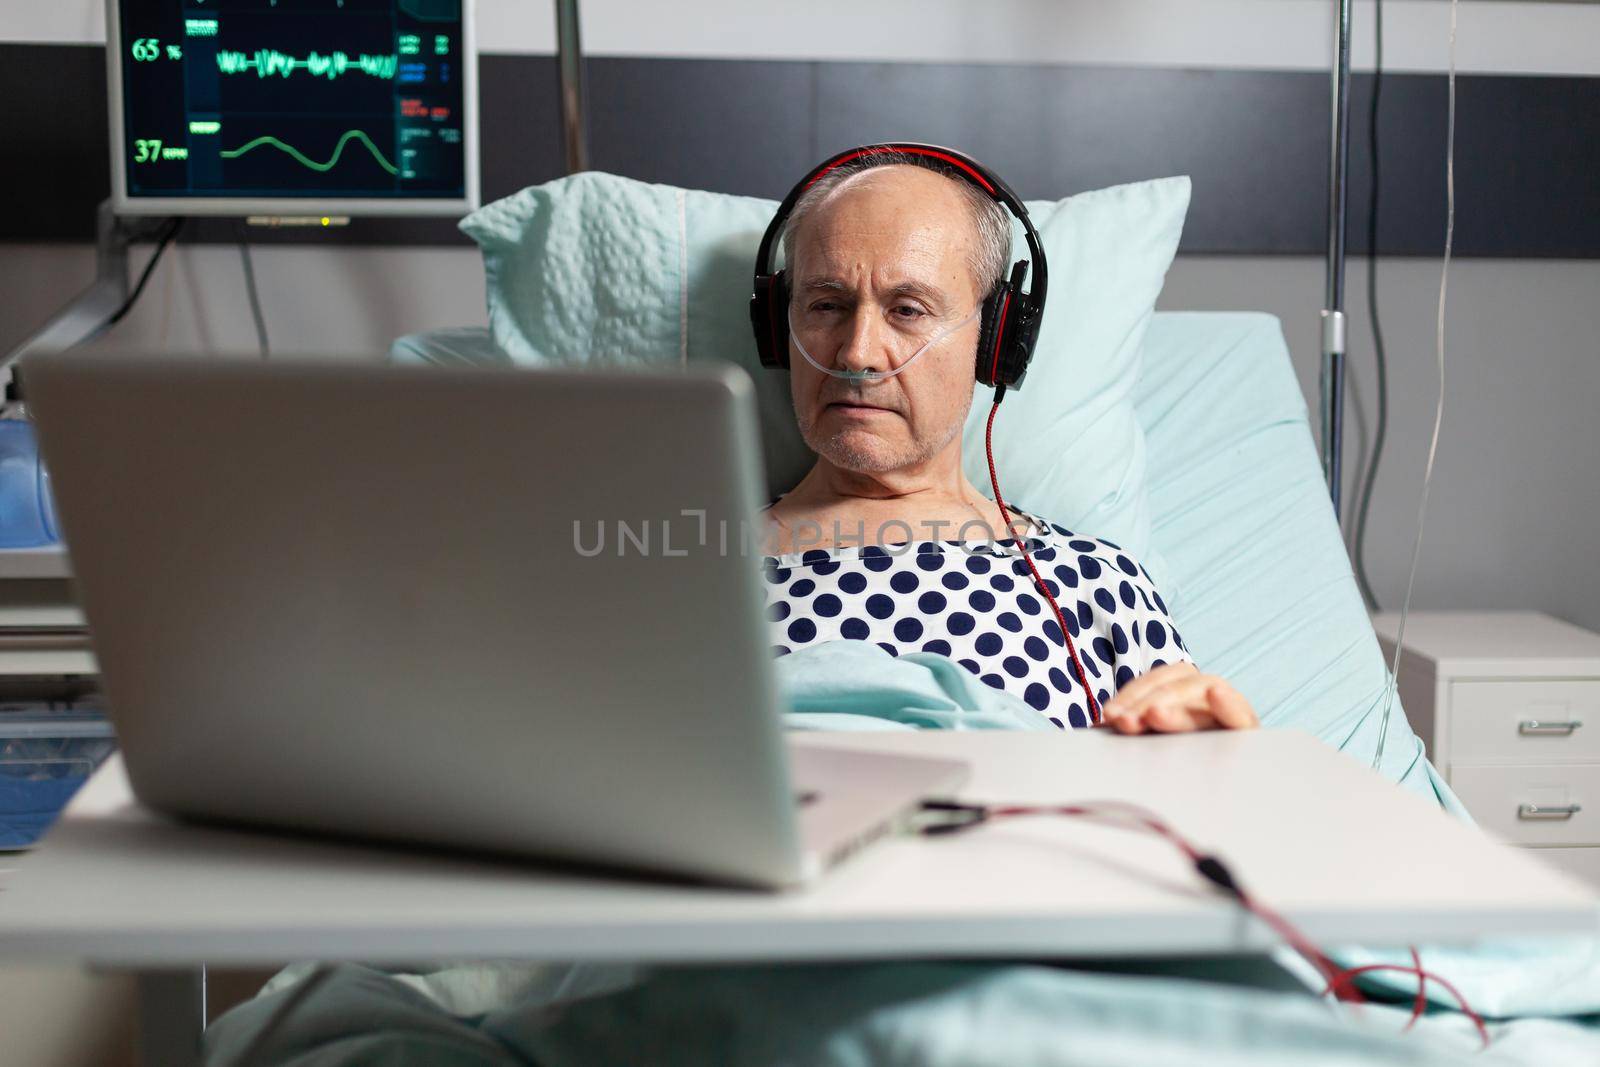 Senior sick man in hospital bed breathing through oxygen mask, listening music on headphones, looking at laptop. Old man monitored by modern equipment.